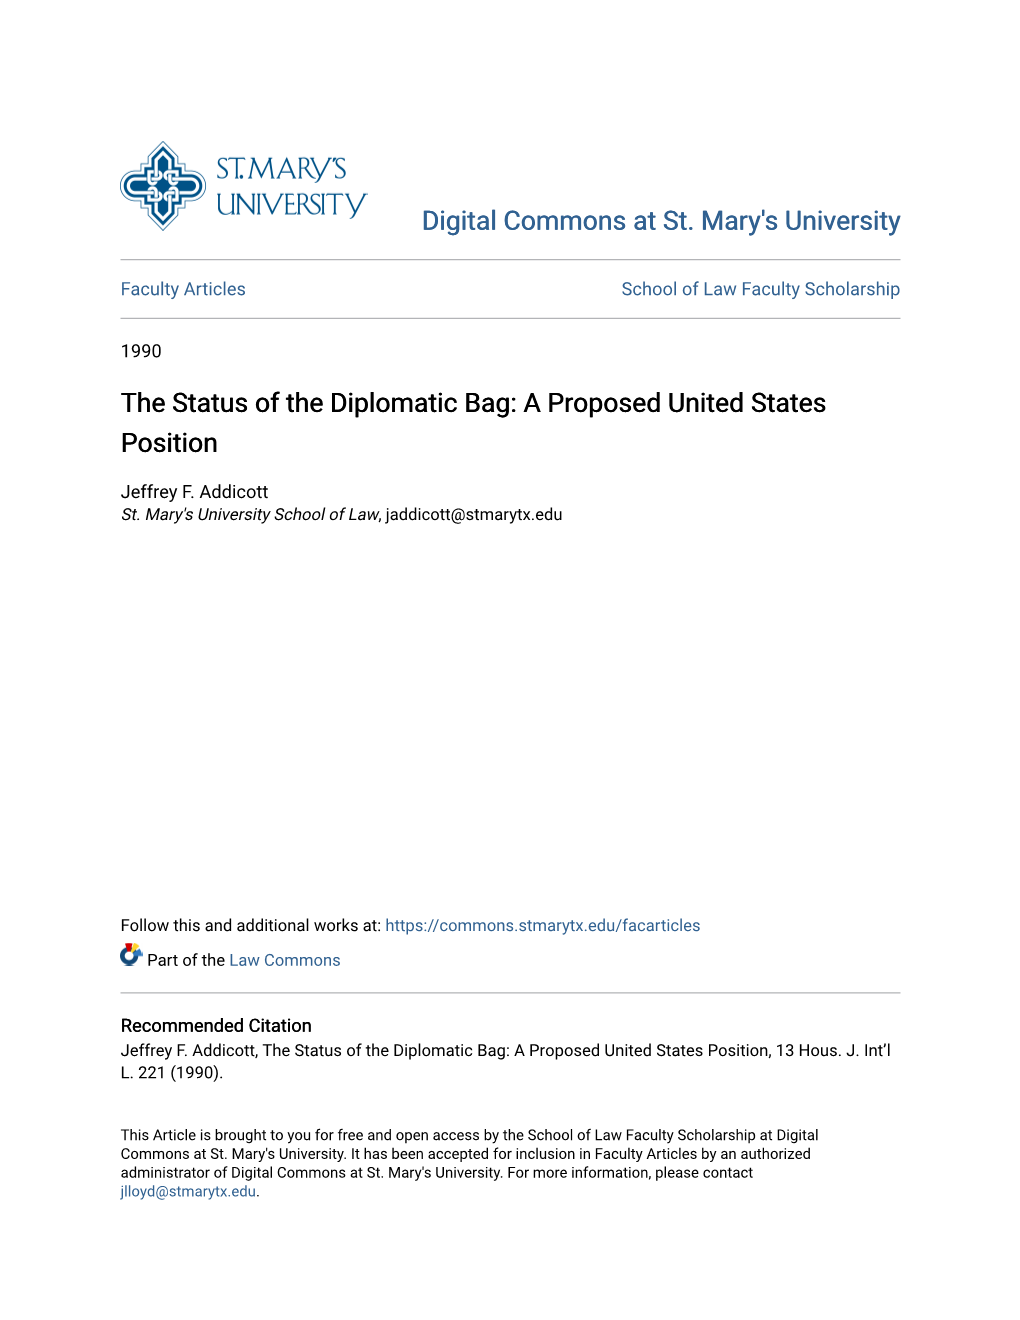 The Status of the Diplomatic Bag: a Proposed United States Position